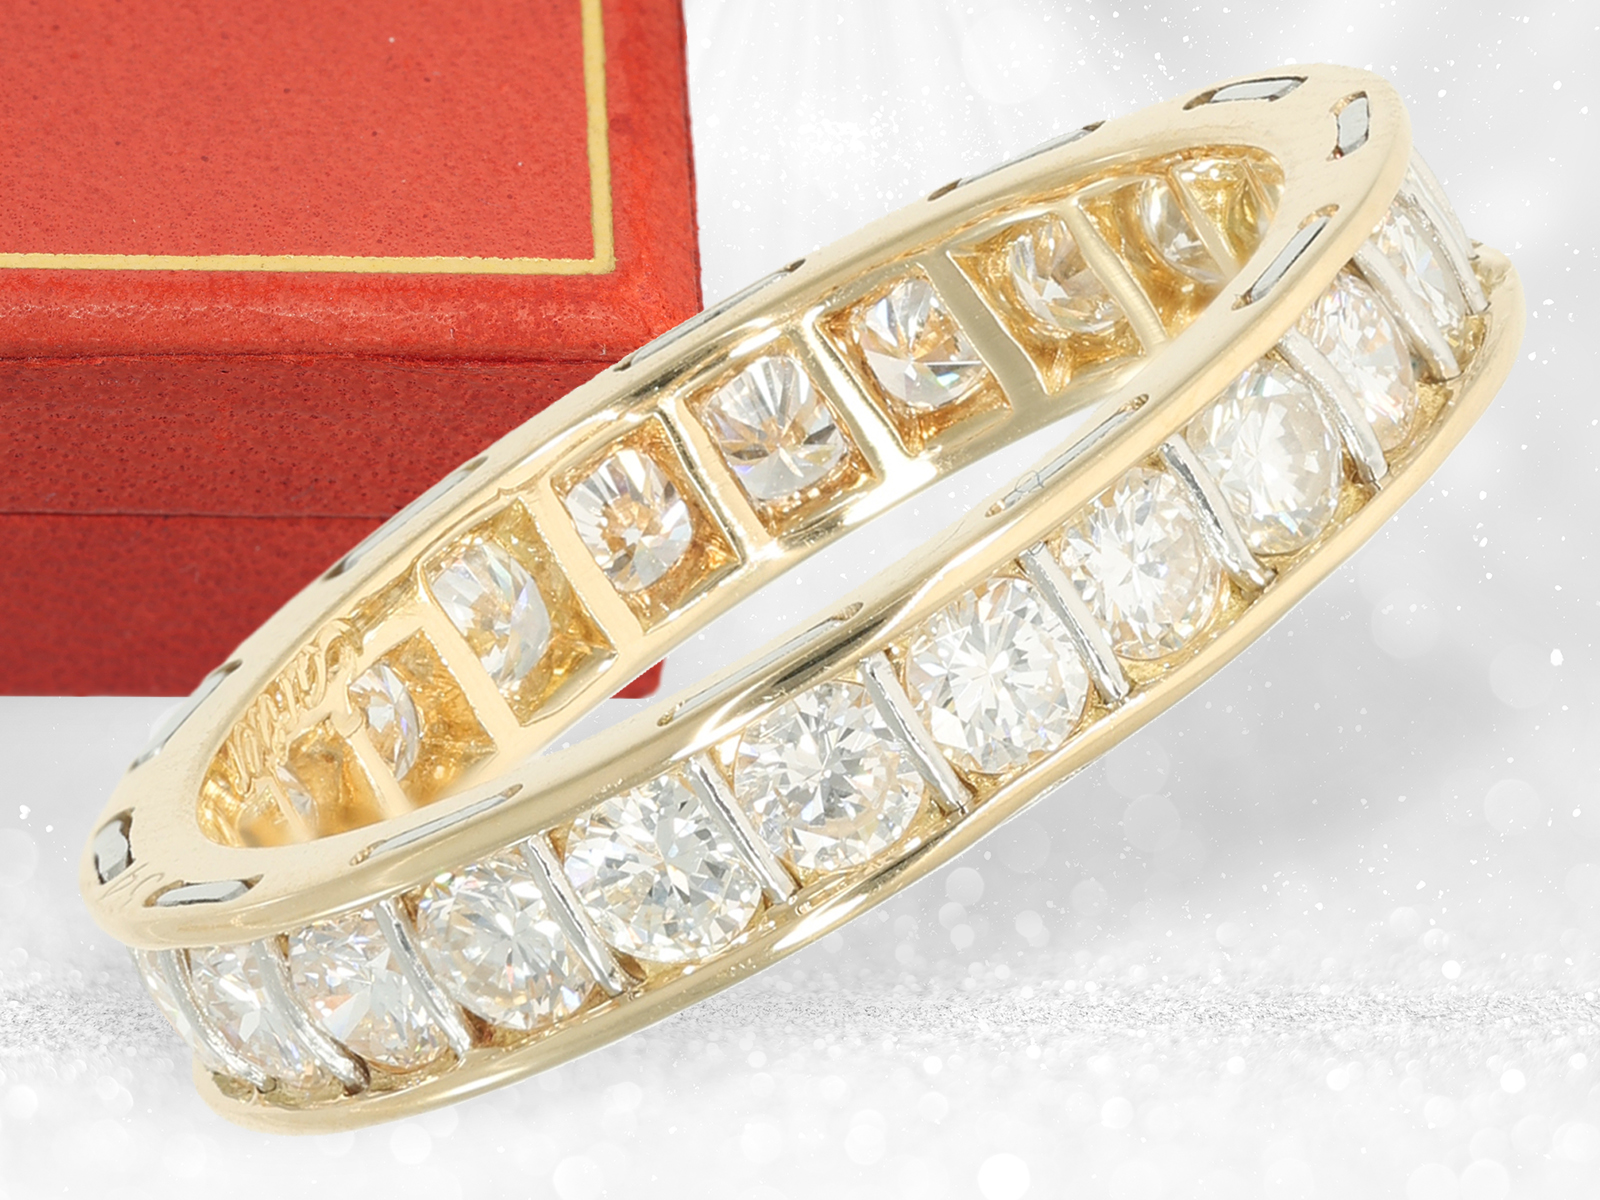 Luxurious vintage memory ring by Cartier, finest brilliant-cut diamonds of approx. 1.92ct, with box